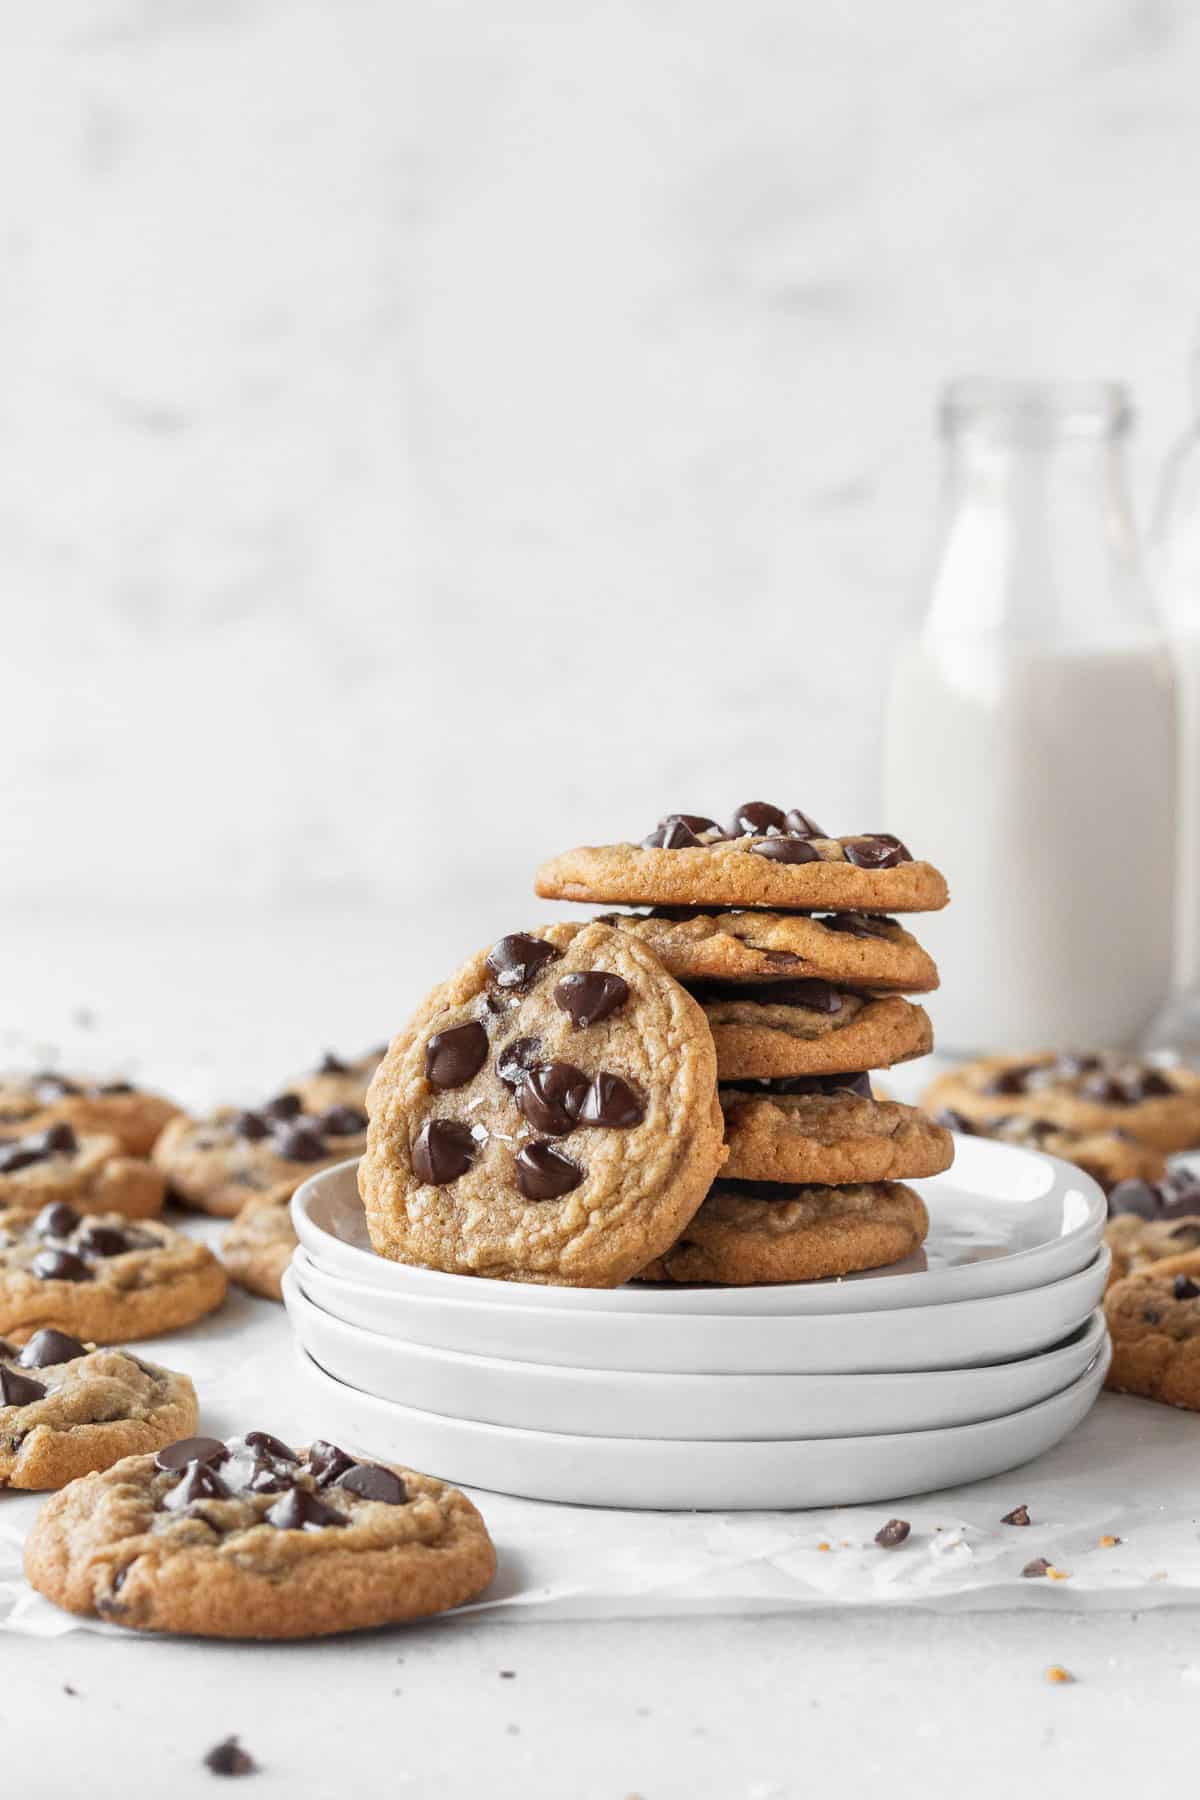 stack of gluten free chocolate chip cookies on a stack of white plates with a glass jug of dairy-free milk in the background.